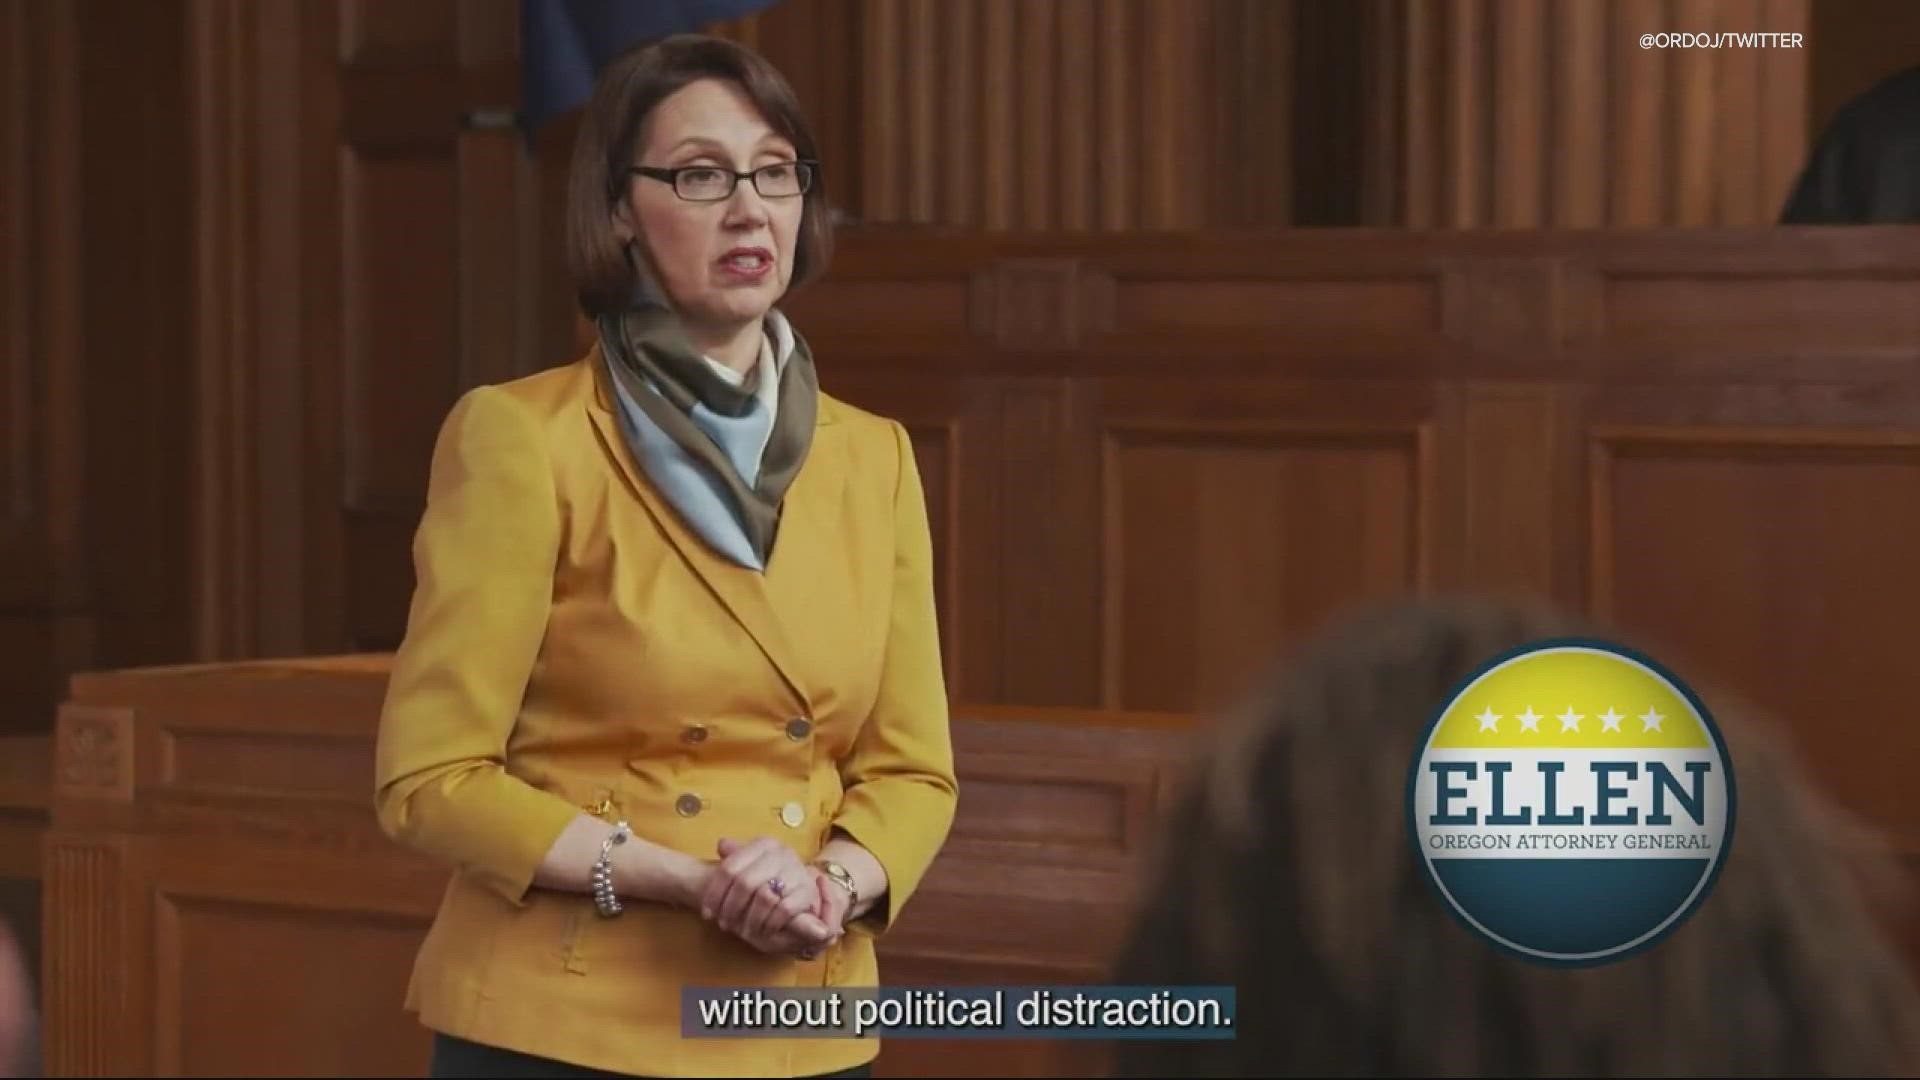 Oregon’s attorney general had been considered a likely contender in the governor’s race, but instead posted a two-minute video about her decision not to run.